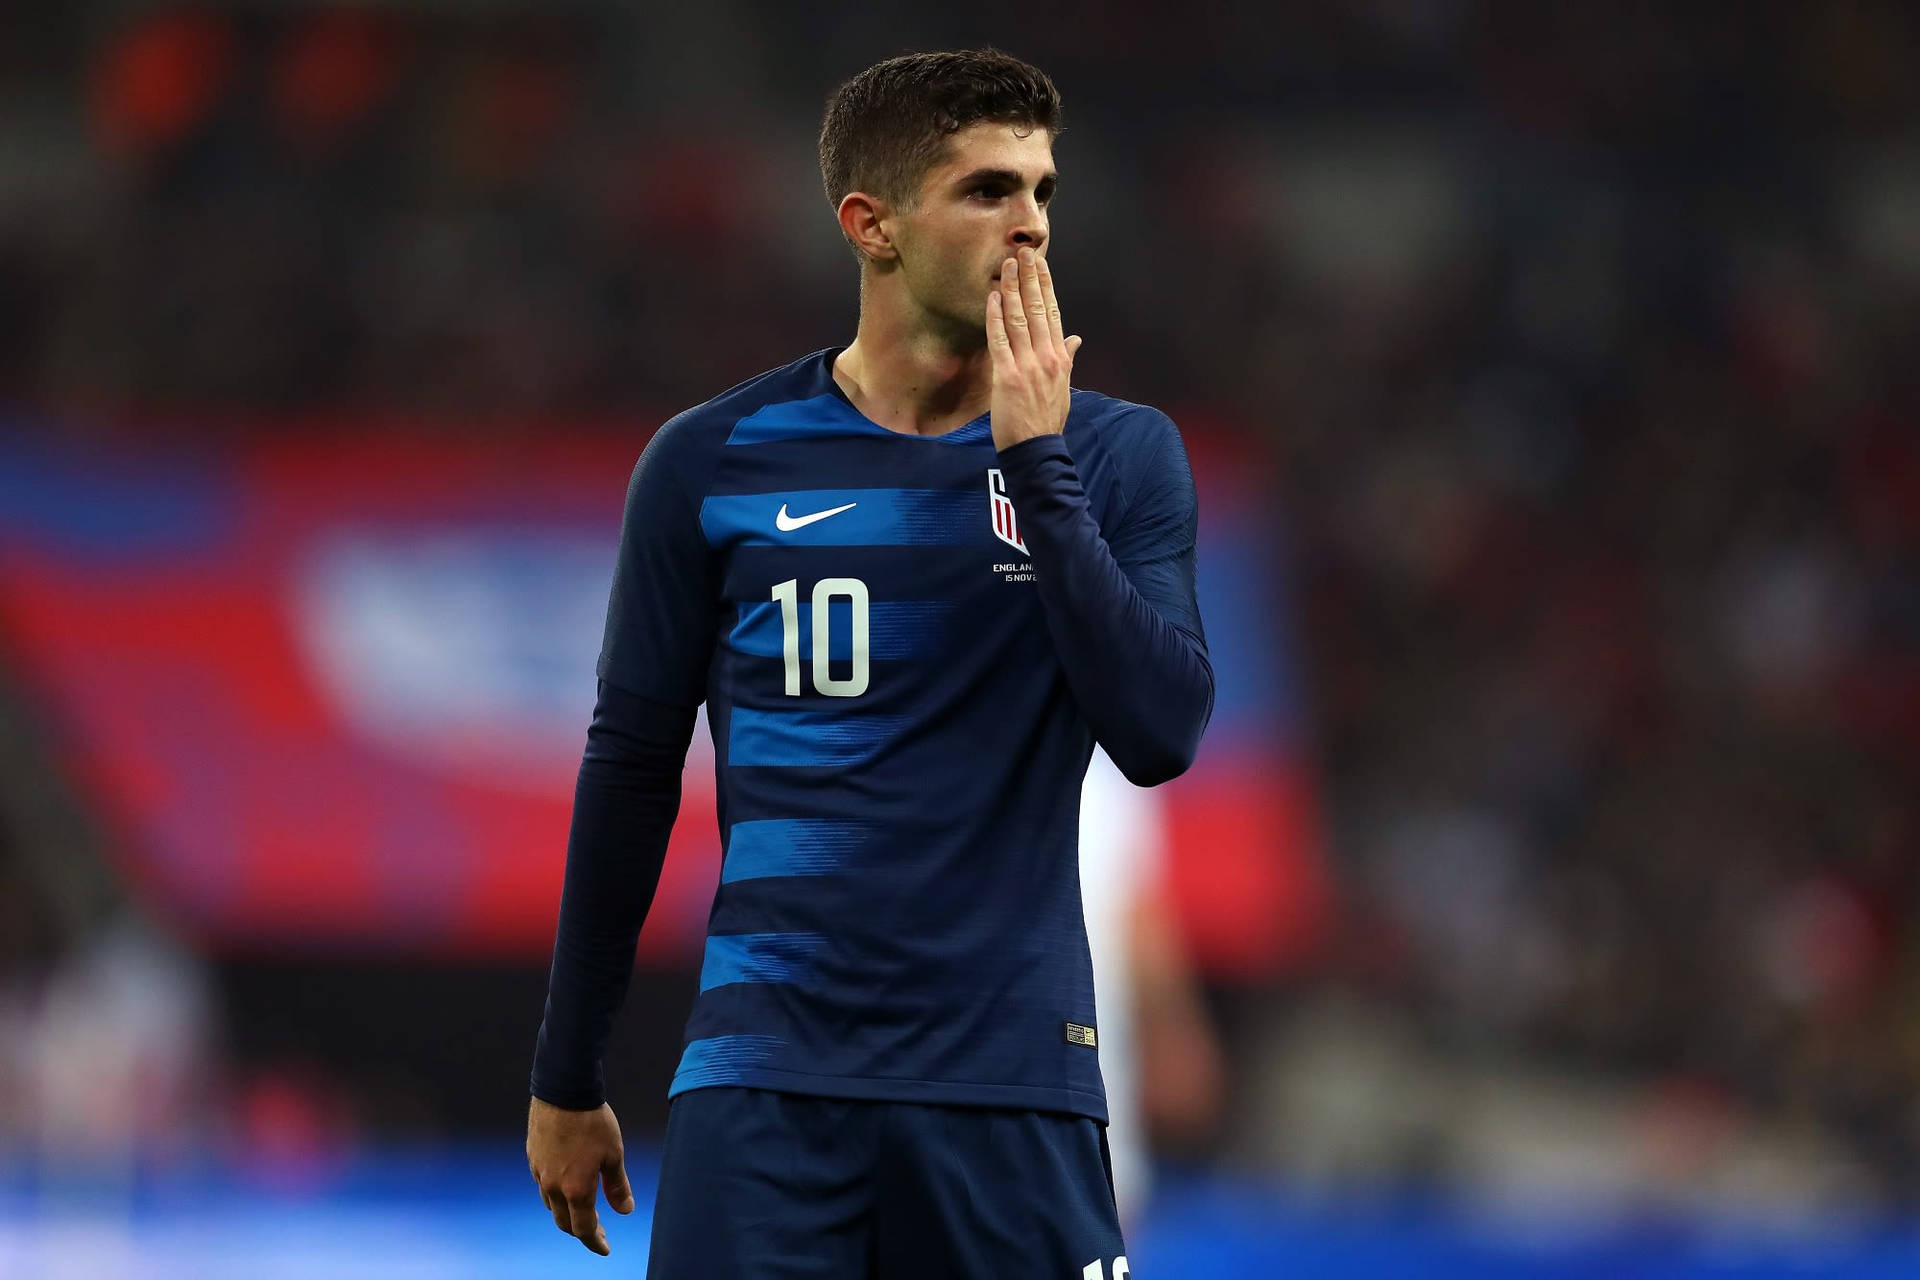 Christianpulisic Med Handen På Munnen. (christian Pulisic With Hand On Mouth.) Wallpaper